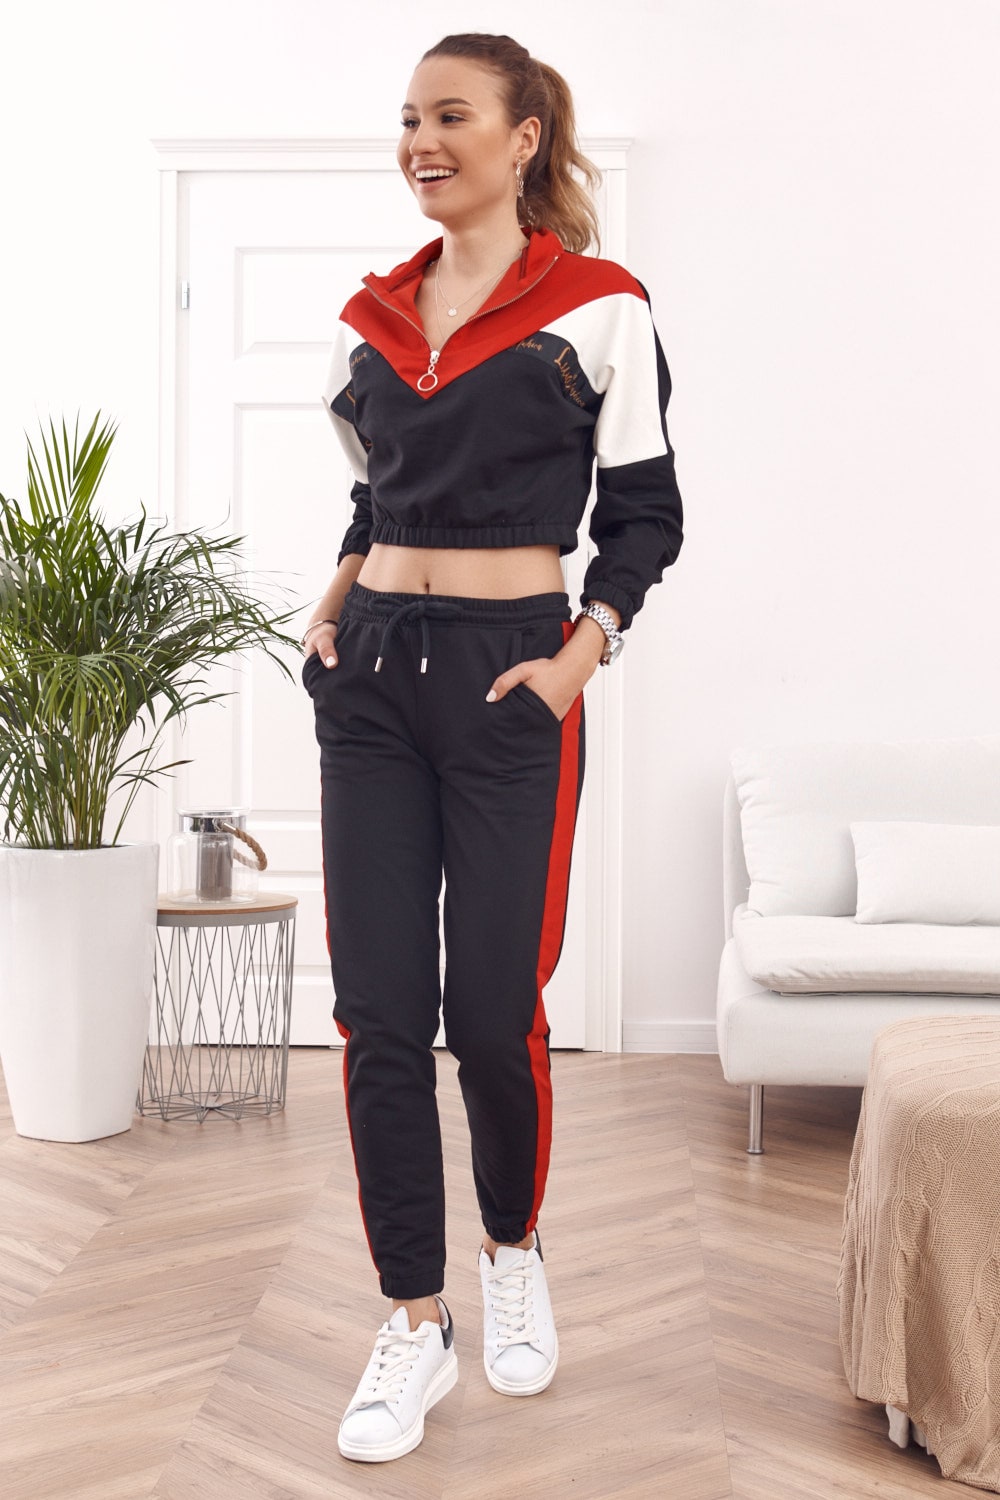 Comfortable sweatshirt with stand-up collar and red and black trousers